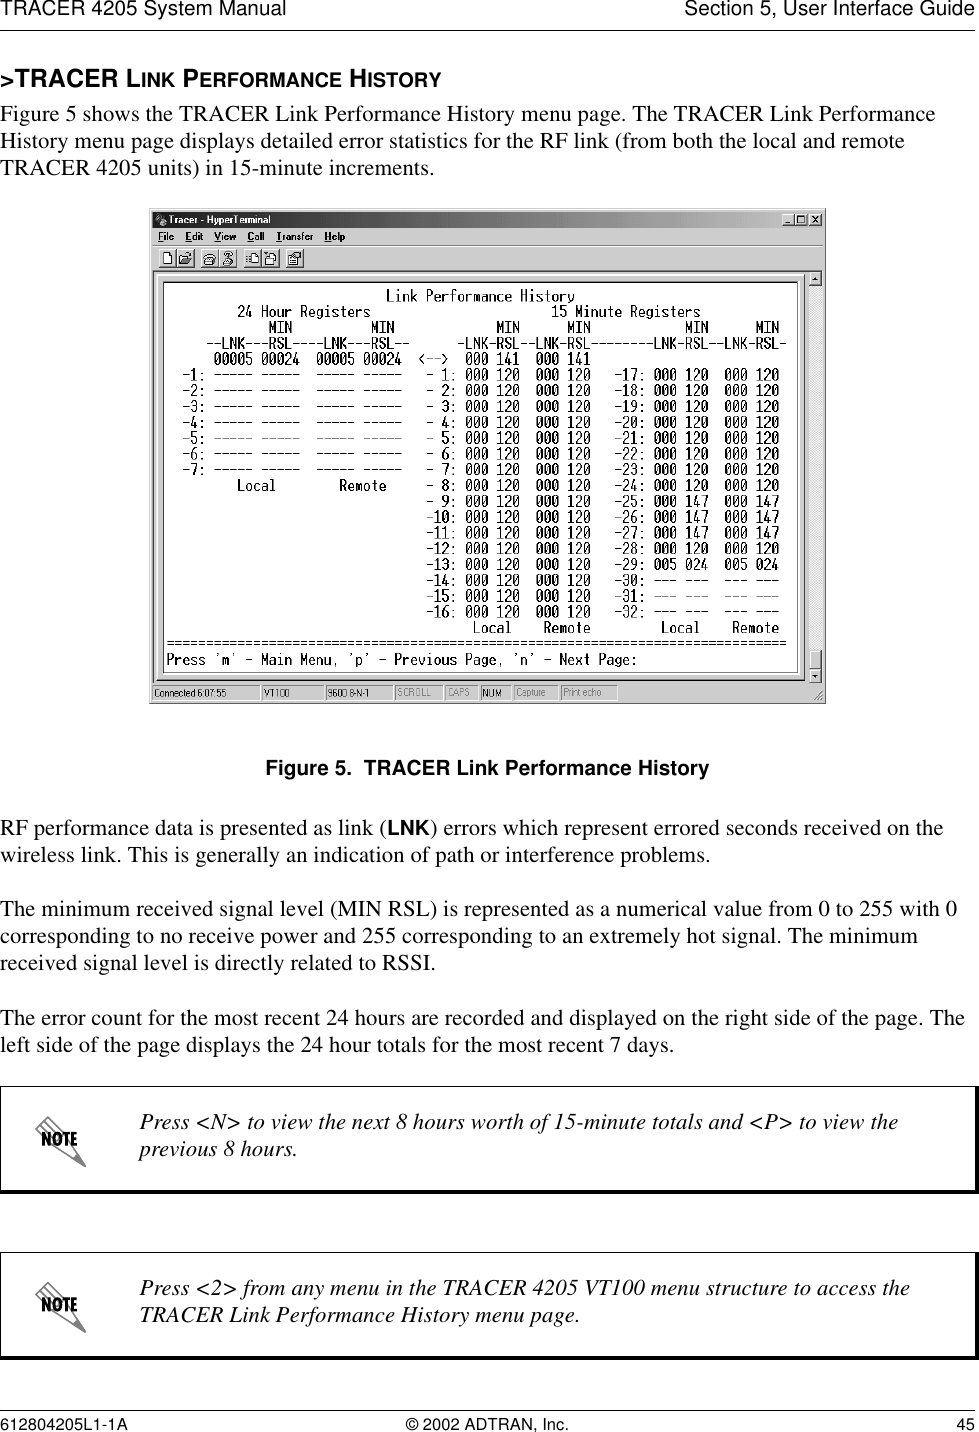 TRACER 4205 System Manual Section 5, User Interface Guide612804205L1-1A © 2002 ADTRAN, Inc. 45&gt;TRACER LINK PERFORMANCE HISTORYFigure 5 shows the TRACER Link Performance History menu page. The TRACER Link Performance History menu page displays detailed error statistics for the RF link (from both the local and remote TRACER 4205 units) in 15-minute increments. Figure 5.  TRACER Link Performance HistoryRF performance data is presented as link (LNK) errors which represent errored seconds received on the wireless link. This is generally an indication of path or interference problems.The minimum received signal level (MIN RSL) is represented as a numerical value from 0 to 255 with 0 corresponding to no receive power and 255 corresponding to an extremely hot signal. The minimum received signal level is directly related to RSSI.The error count for the most recent 24 hours are recorded and displayed on the right side of the page. The left side of the page displays the 24 hour totals for the most recent 7 days. Press &lt;N&gt; to view the next 8 hours worth of 15-minute totals and &lt;P&gt; to view the previous 8 hours.Press &lt;2&gt; from any menu in the TRACER 4205 VT100 menu structure to access the TRACER Link Performance History menu page.